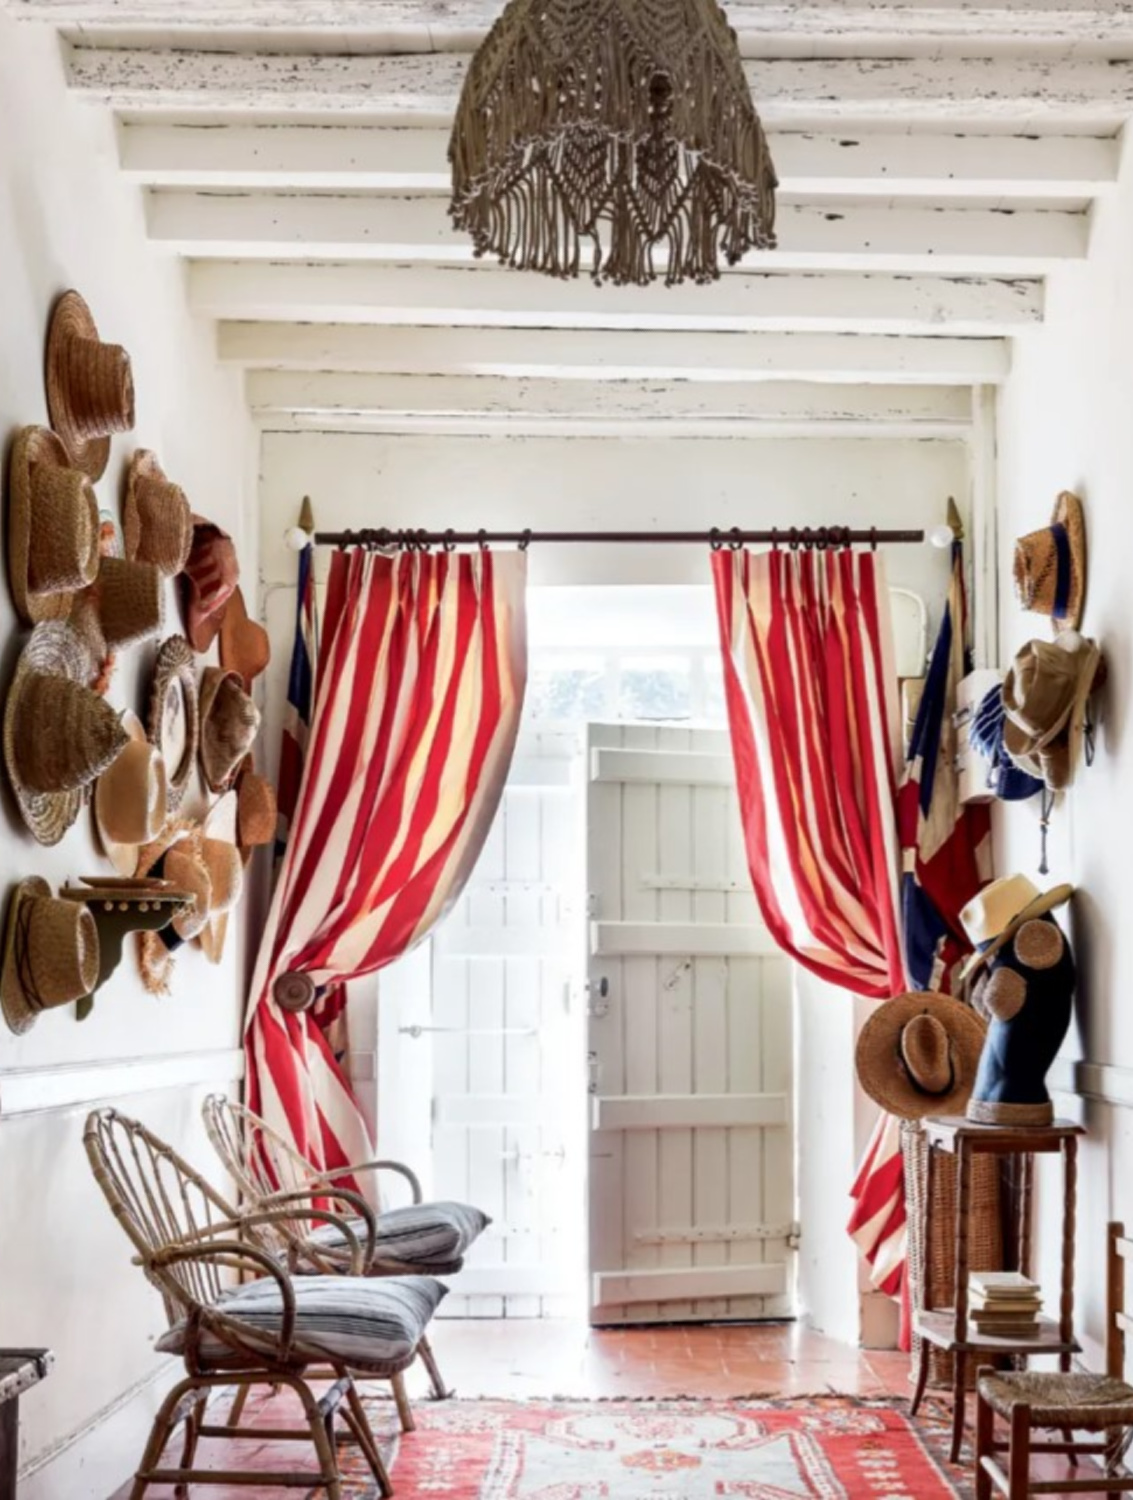 Colorful red stripe curtains and hat collection on wall of eclectic interior in a 19th century French cottage in Toulouse by Lucinda Chambers - photo by Paul Massey. #frenchcottage #frenchfarmhouse #interiordesign